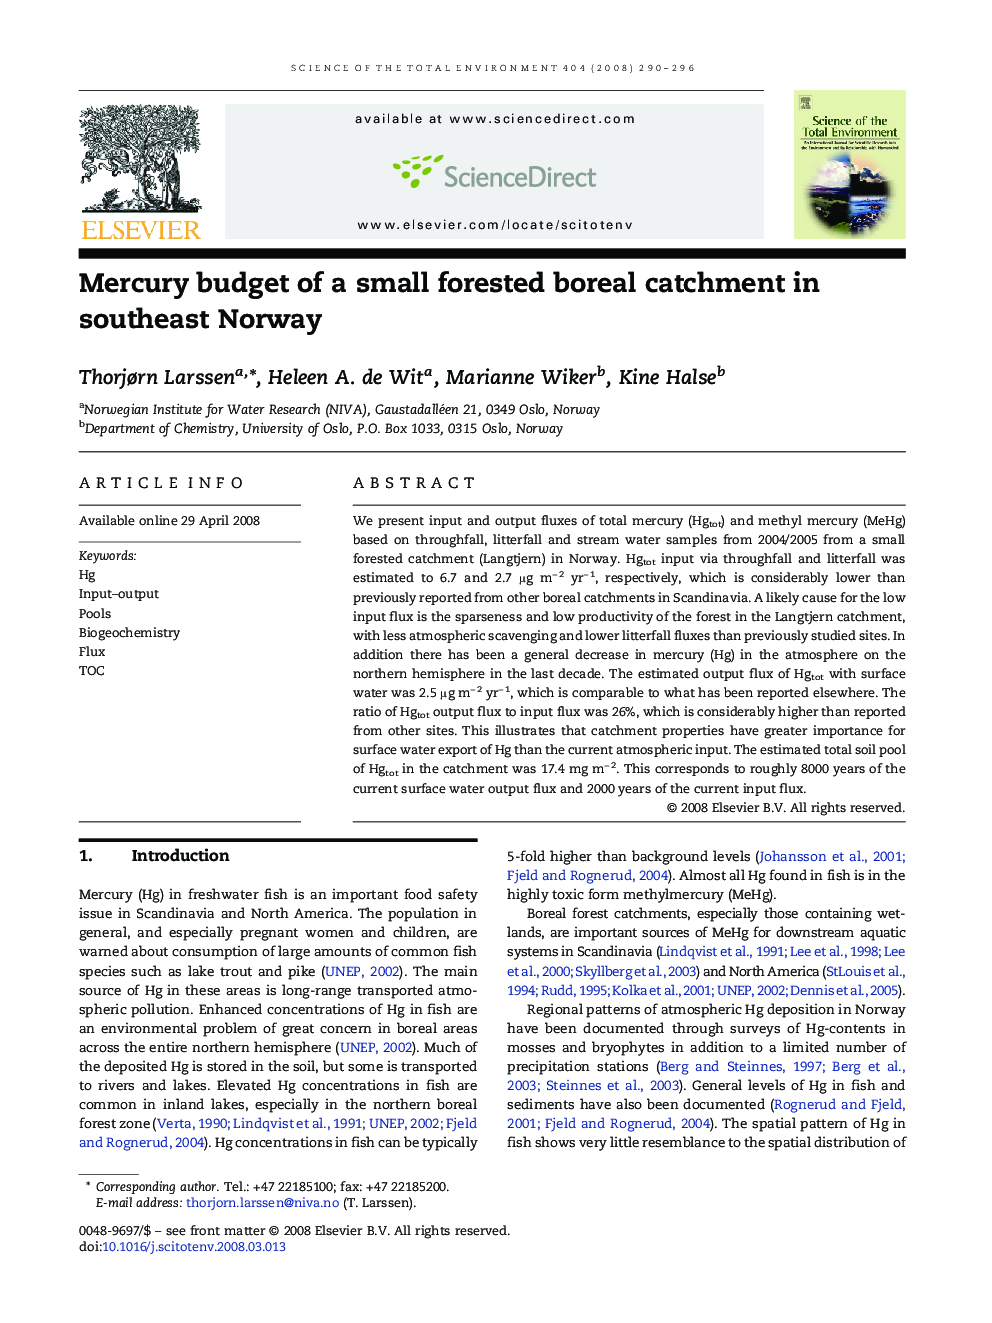 Mercury budget of a small forested boreal catchment in southeast Norway